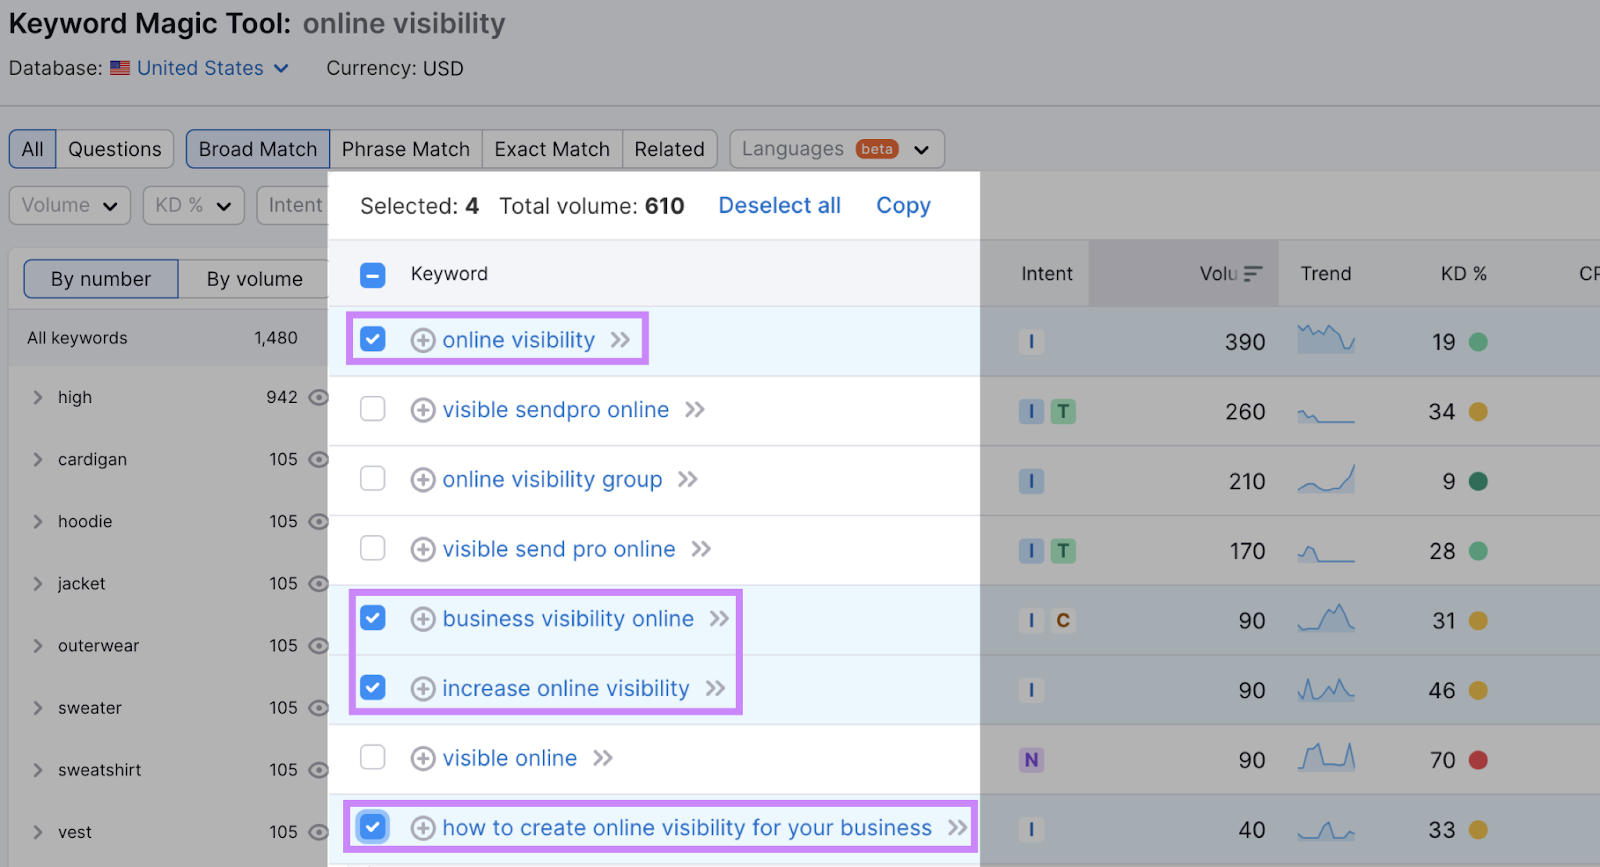 Keyword Magic Tool's results for "online visibility"